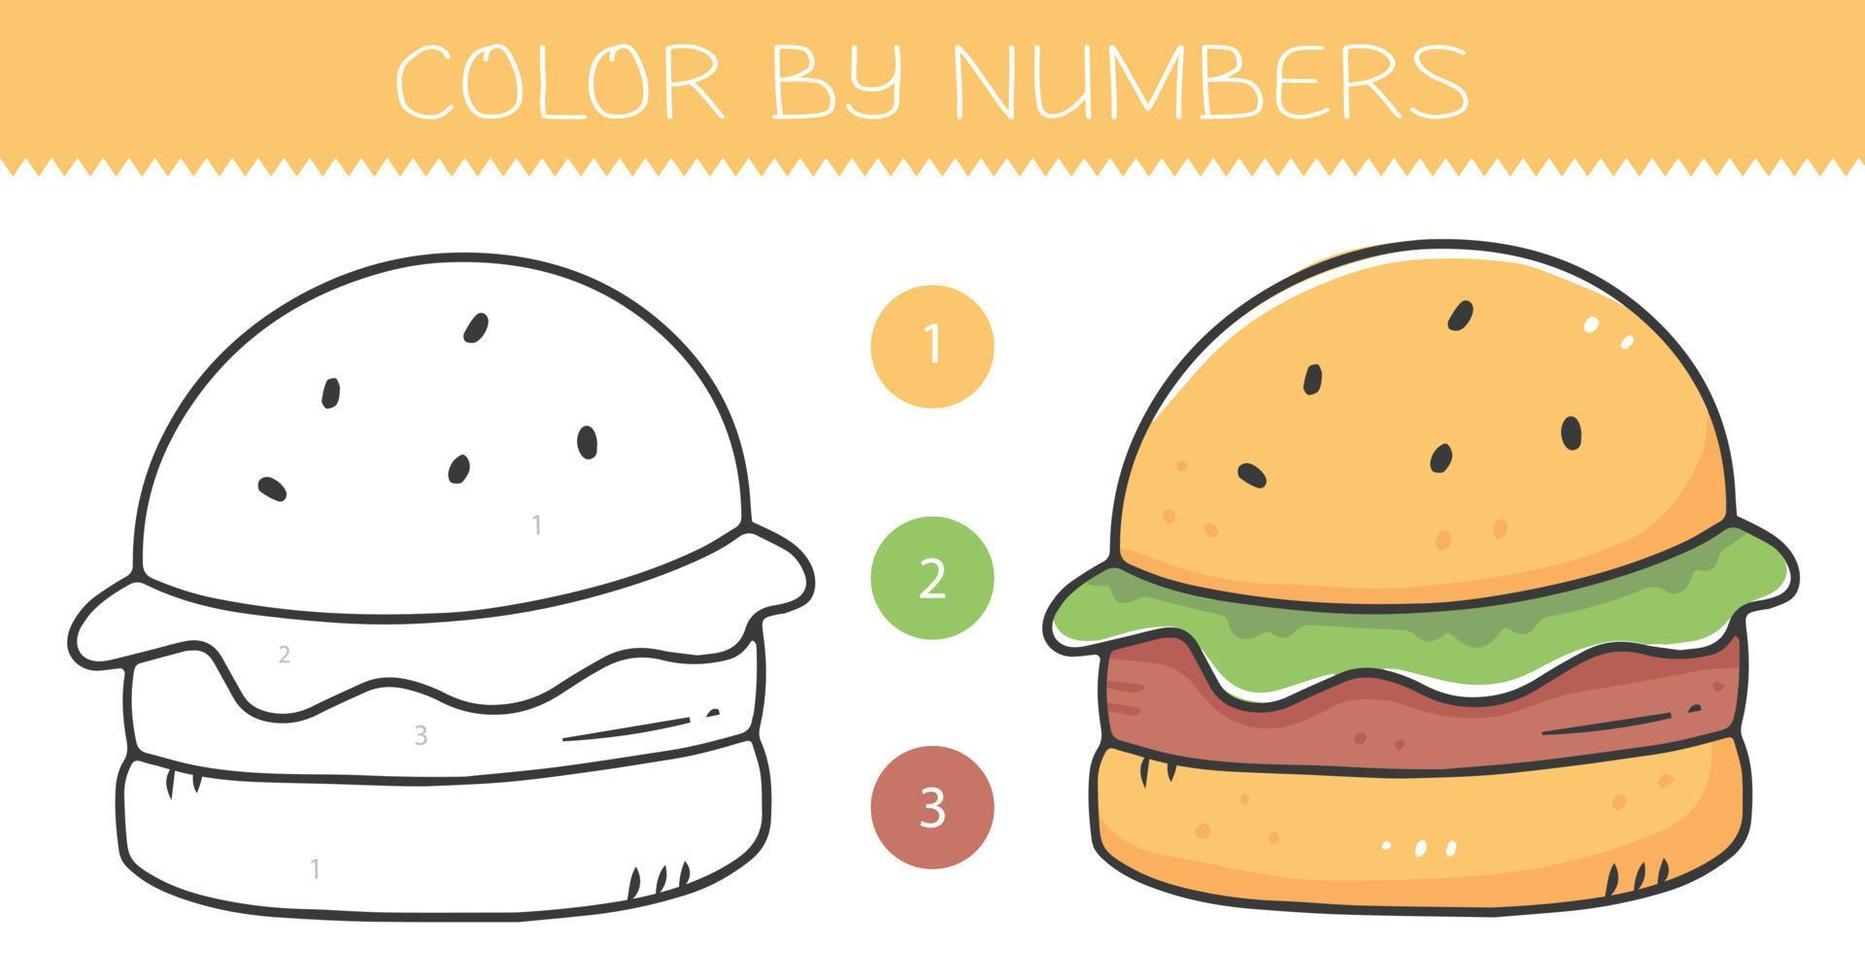 Color by numbers coloring book for kids with a burger. Coloring page with cute cartoon hamburger with an example for coloring. Monochrome and color versions. Vector illustration.